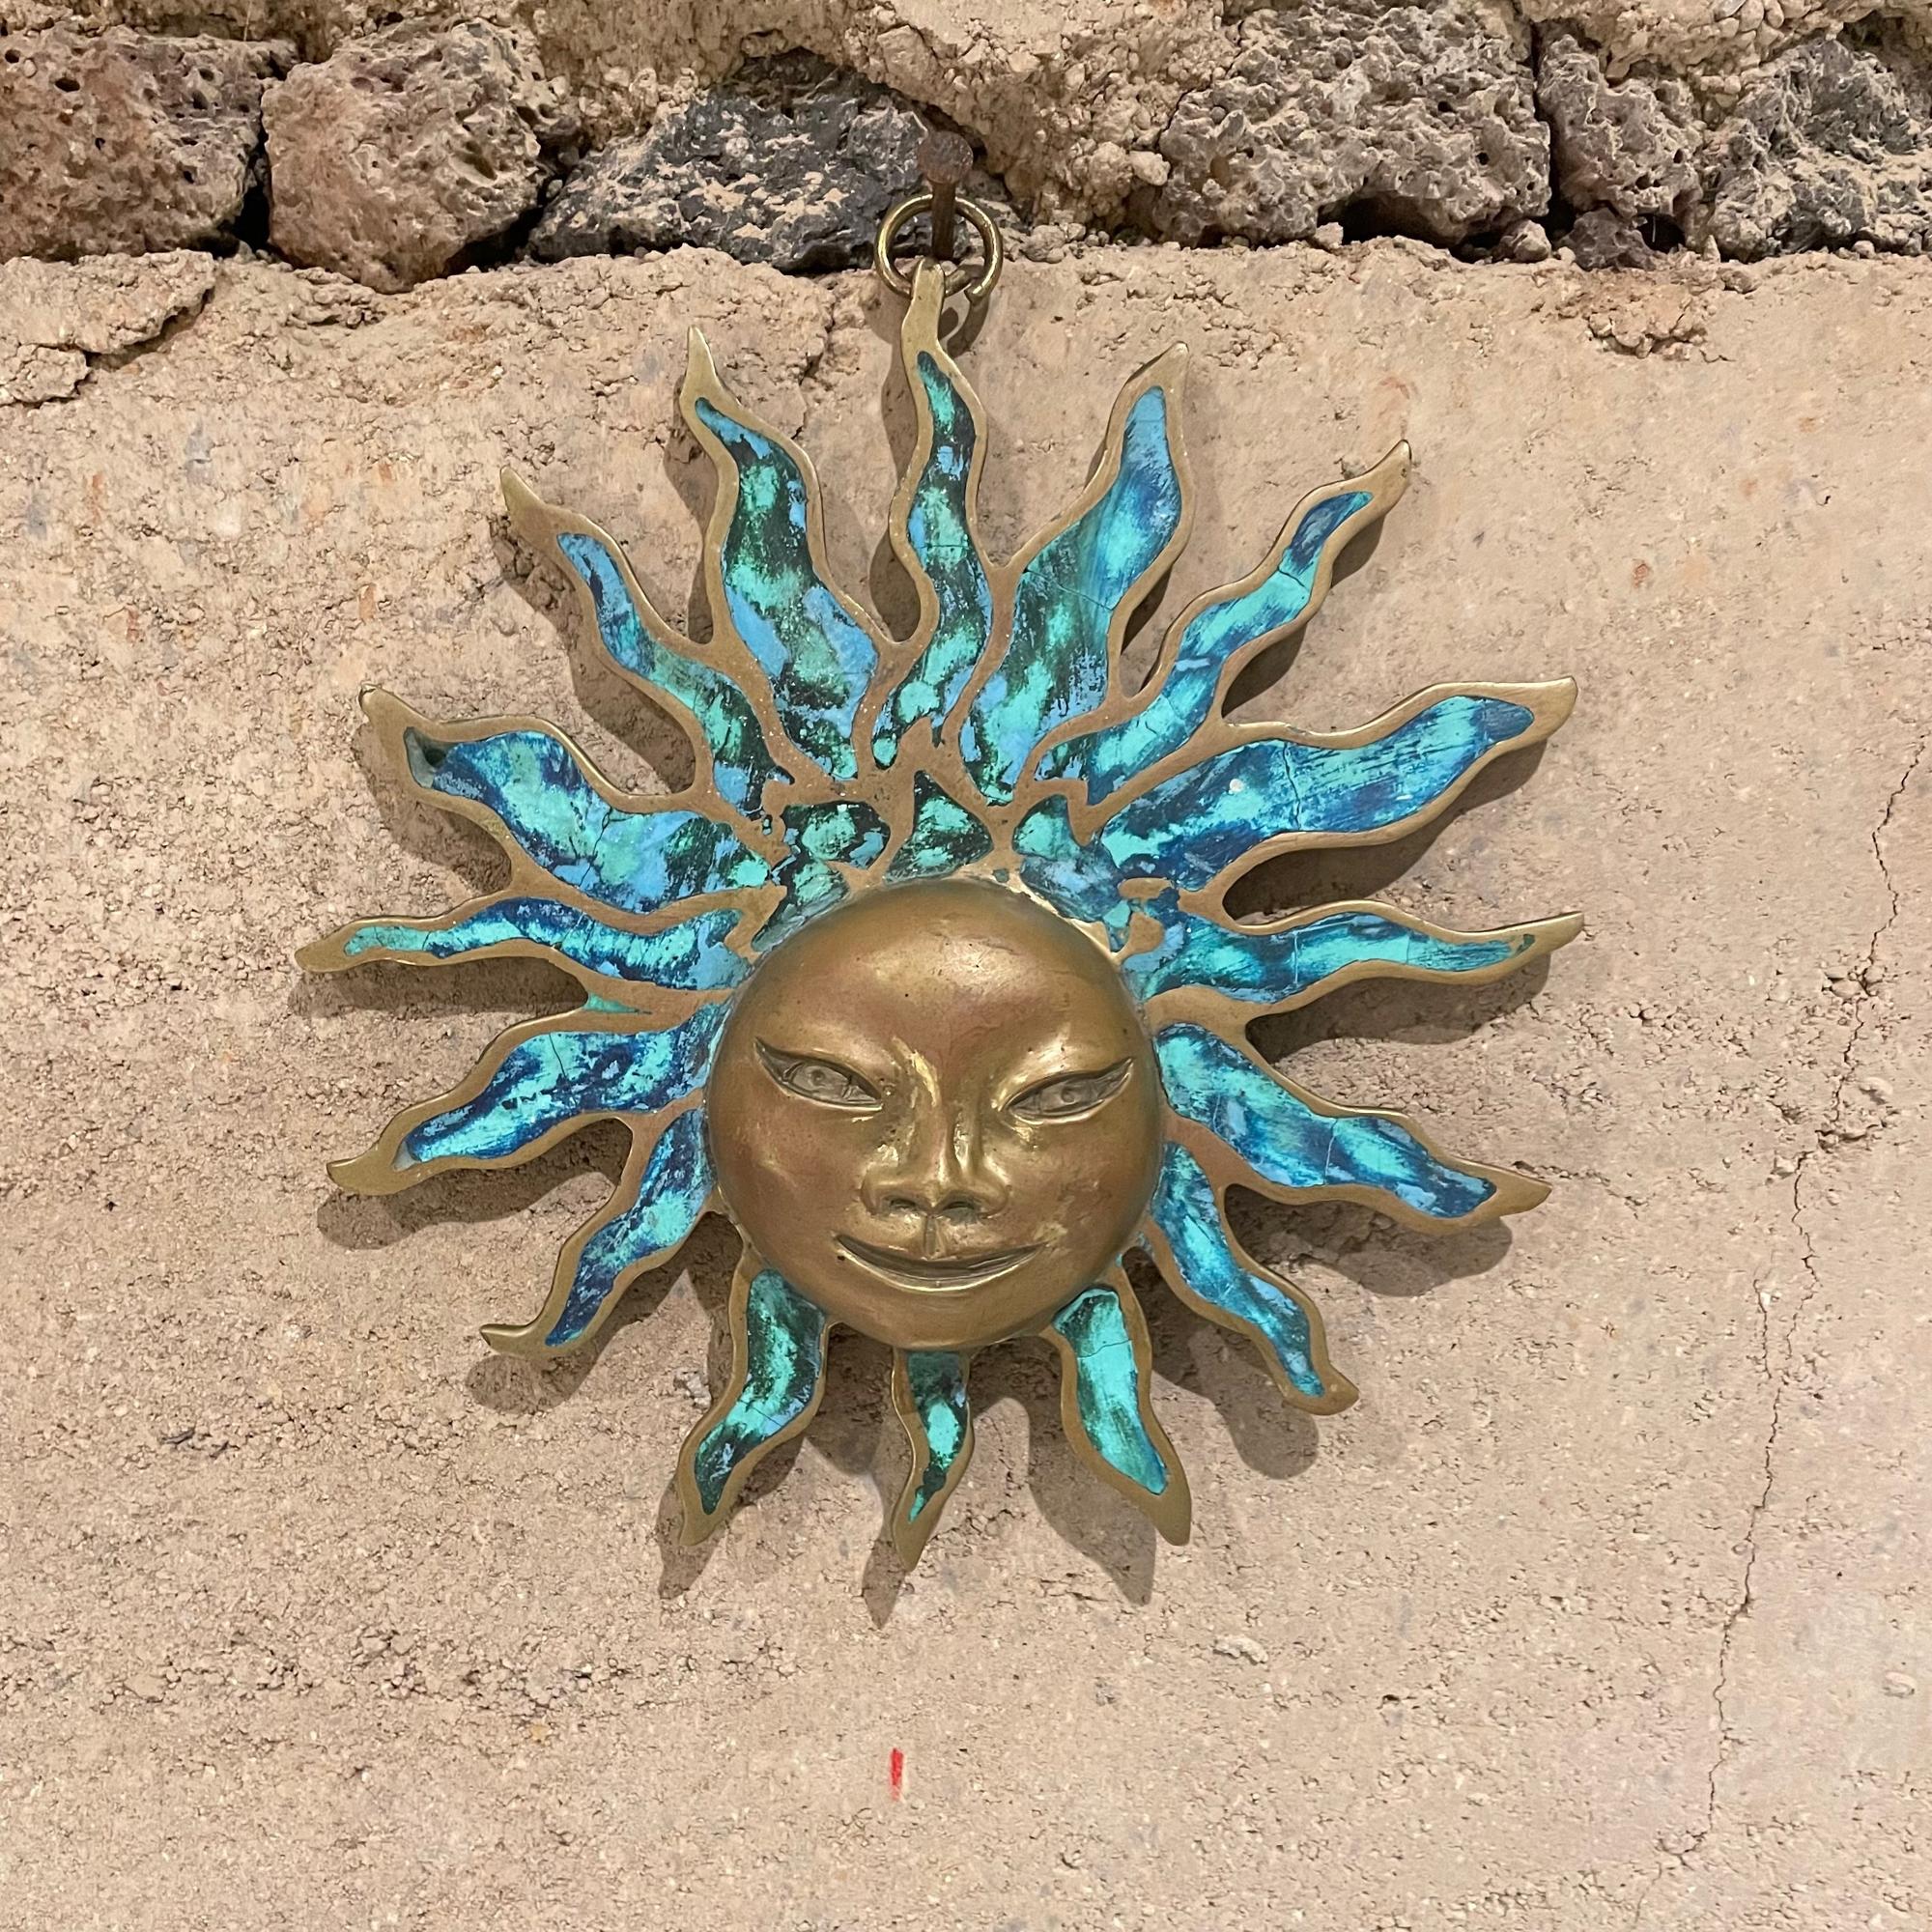 Pepe Mendoza powerful Sun sculpture wall art made in Mexico 1958
Radiant Bronze and Malachite Turquoise
Pepe Mendoza Studio
Period style: Mid-Century Modern Mexico
Date: 1958
Stamped by maker artist sculptor Pepe Mendoza
8.75 W x 9.25 H x 1.38 D